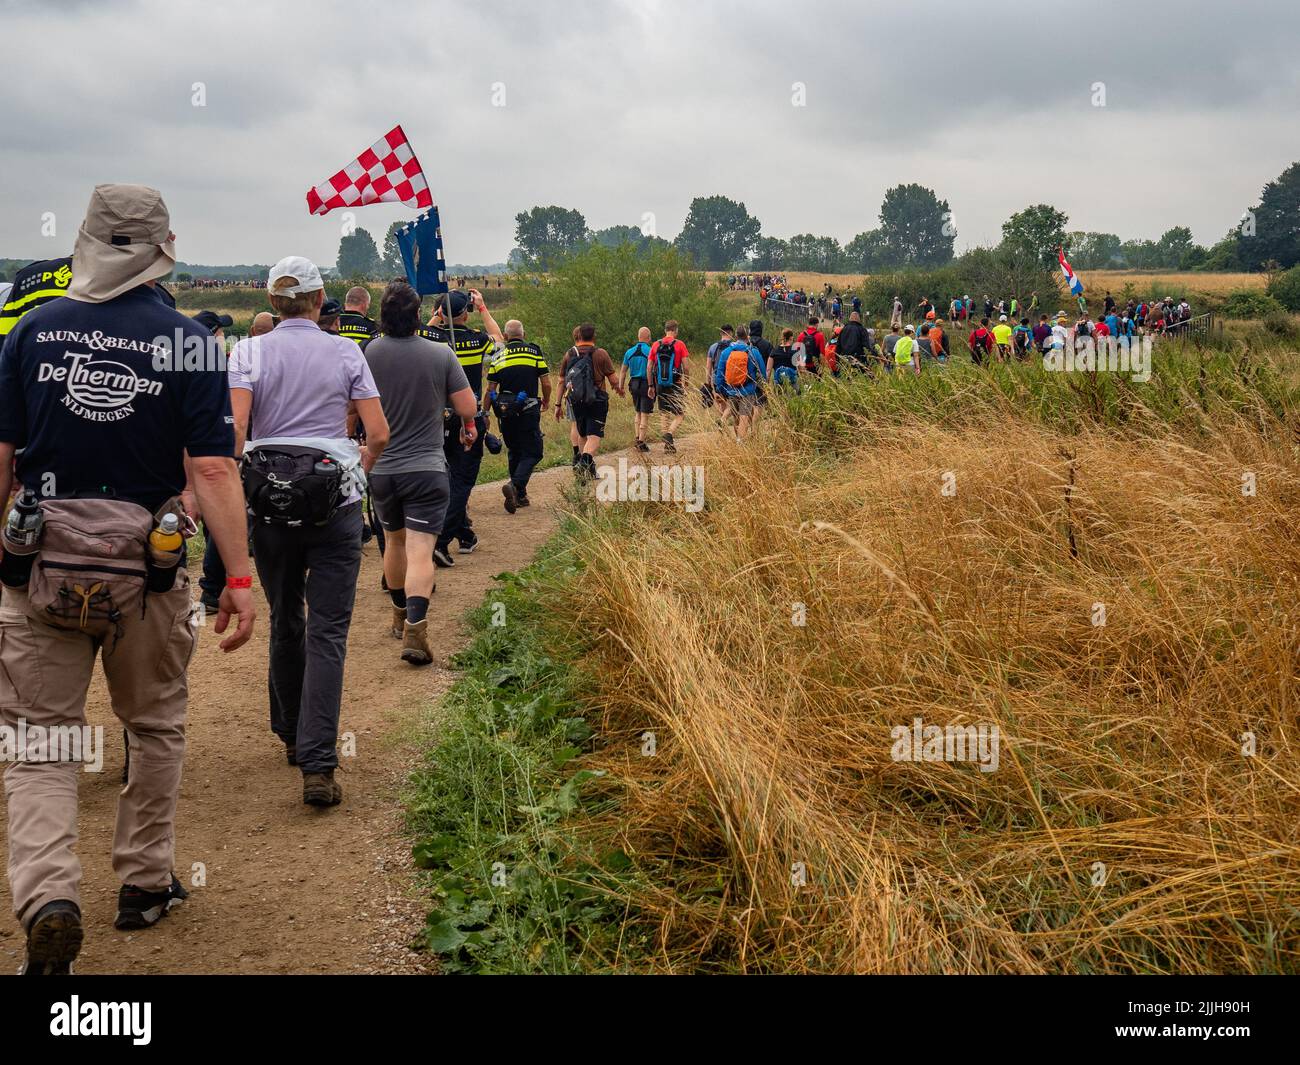 Participants are seen walking through a natural park during the world’s biggest multi-day walking event. The Four Days March (in Dutch 'Vierdaagse') is seen as the prime example of sportsmanship and international bonding between military servicemen and civilians from many different countries. After two years of cancellations, it was held again, but the first day was canceled due to warm temperatures, turning the four marches into three days marches. This is the 104 edition and the official total of walkers registered was 38,455 from 69 countries. They can choose to walk 30km, 40km, or 50km per Stock Photo